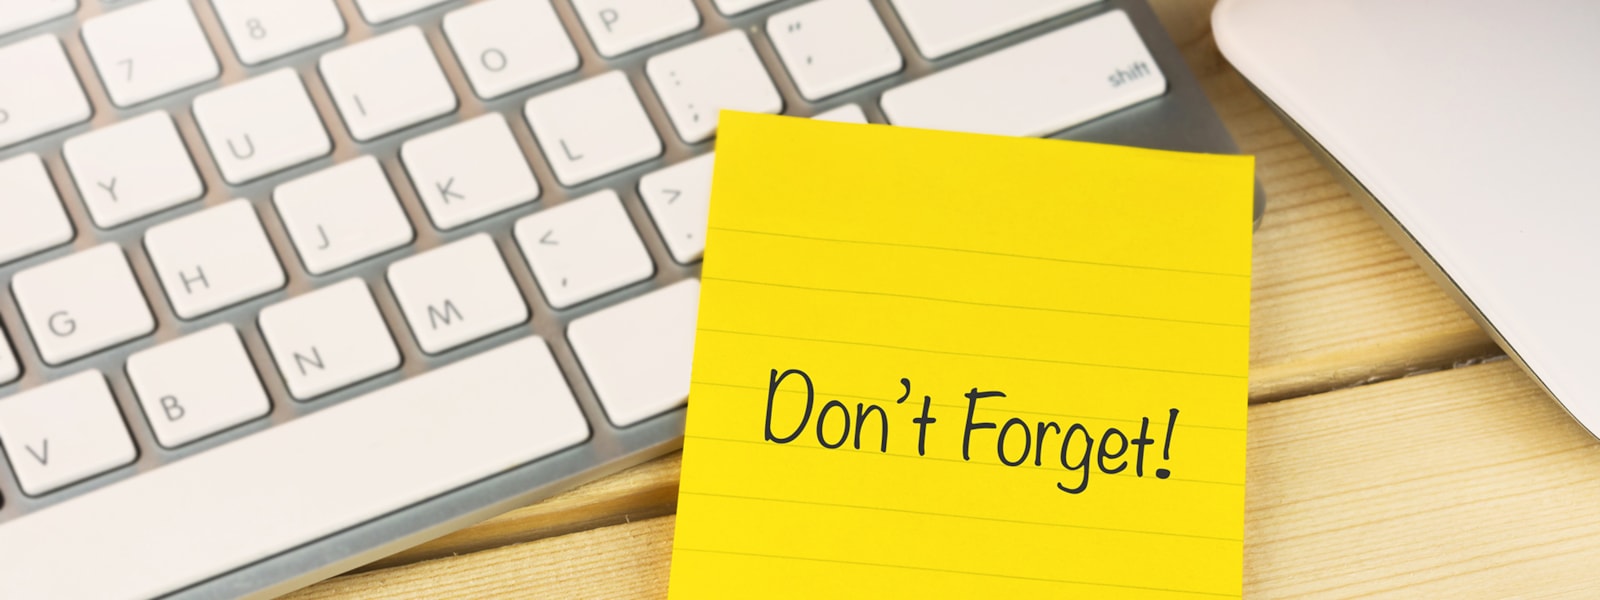 Don't forget note with computer keyboard